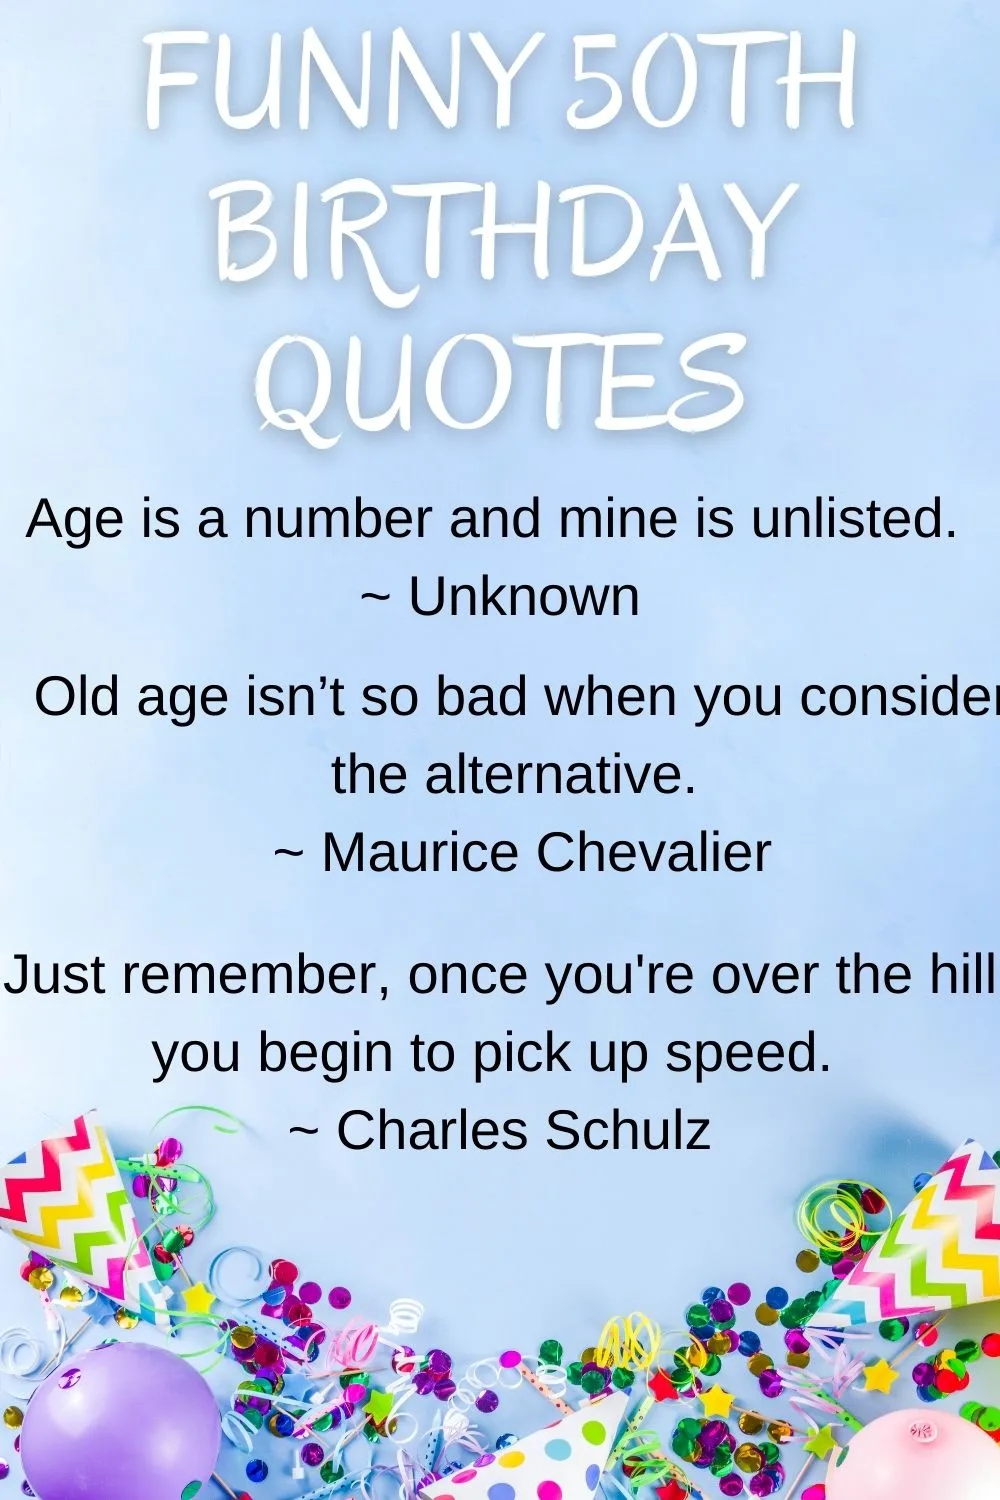 Happy 50th Birthday Quotes: Inspiring Messages And Best Wishes - Major Birthdays